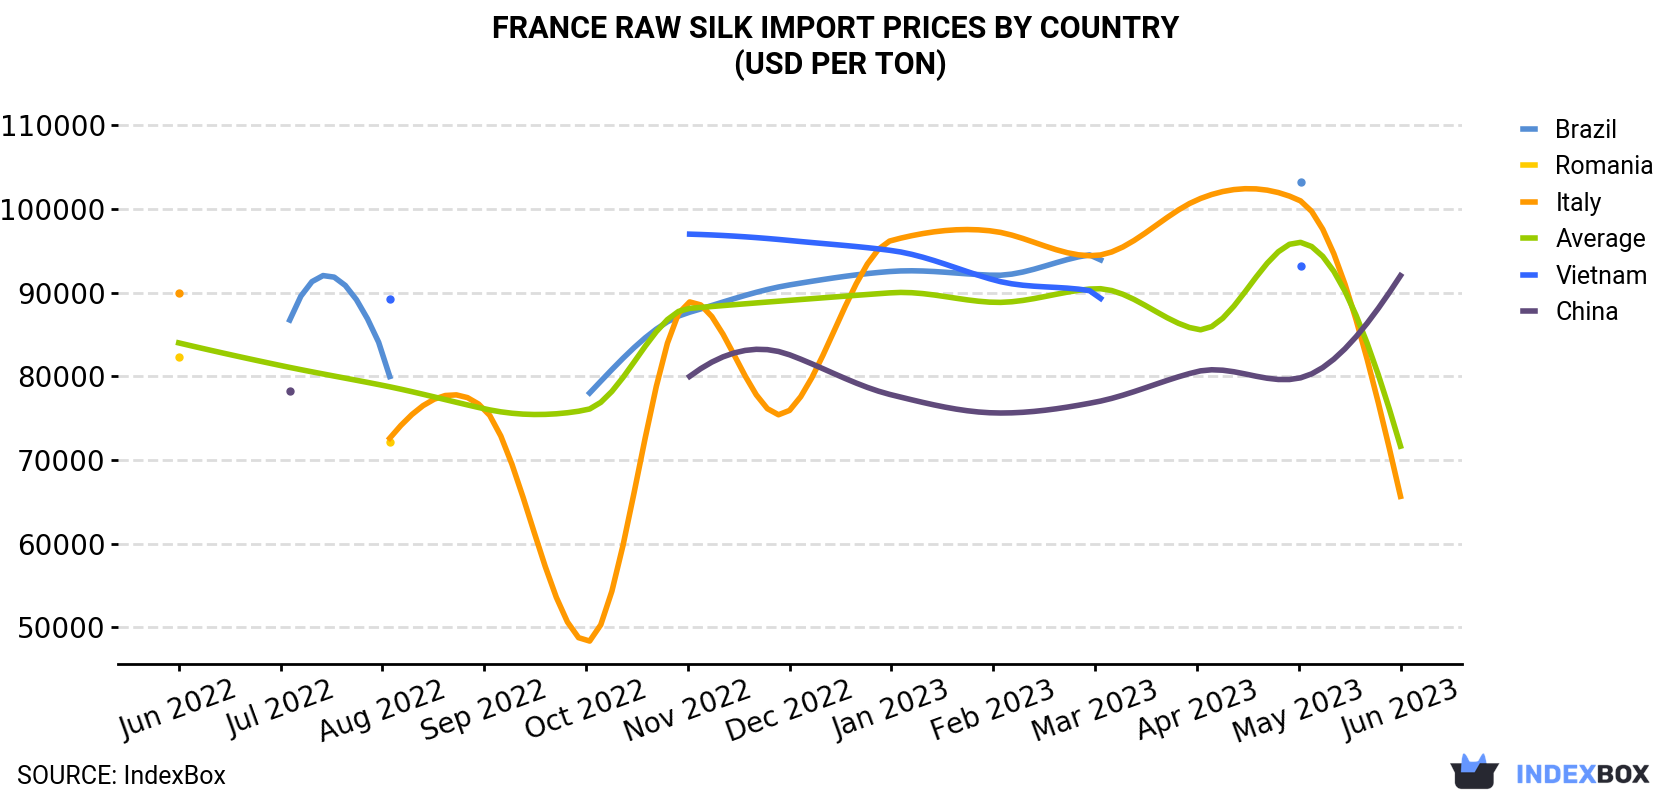 France Raw Silk Import Prices By Country (USD Per Ton)